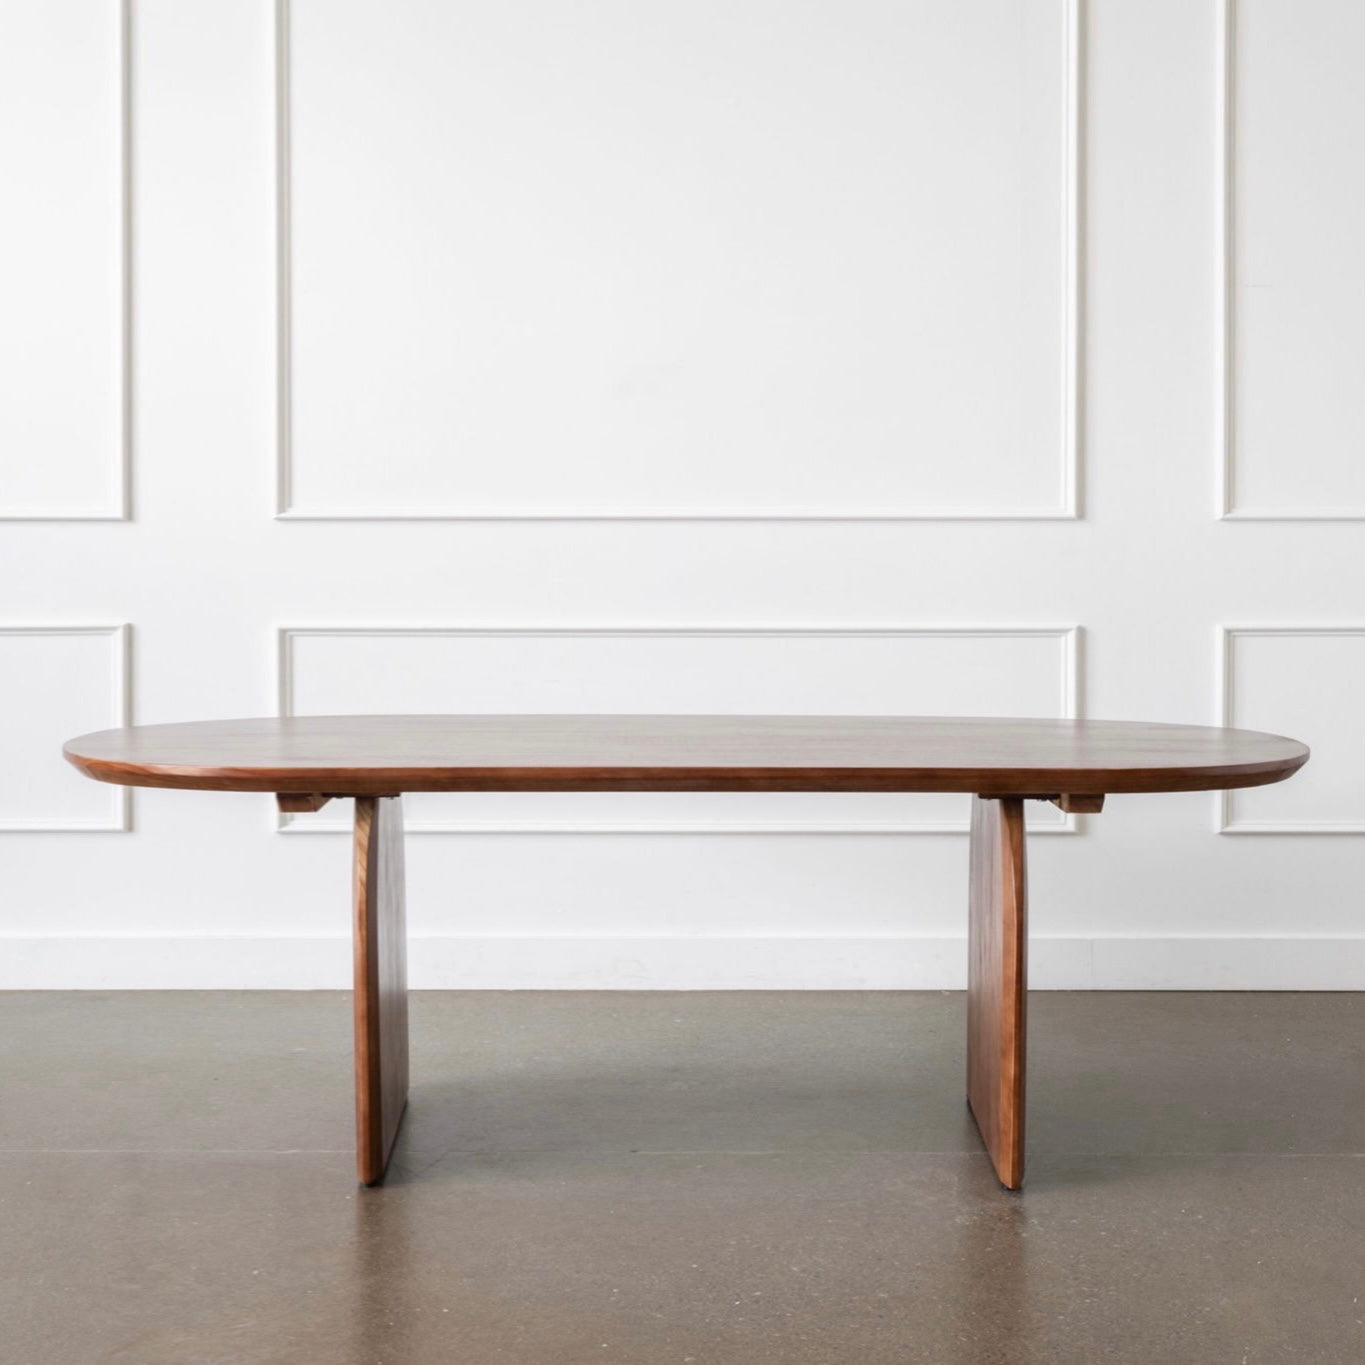 Hedy - New Zealand Pine Dining Table 101"